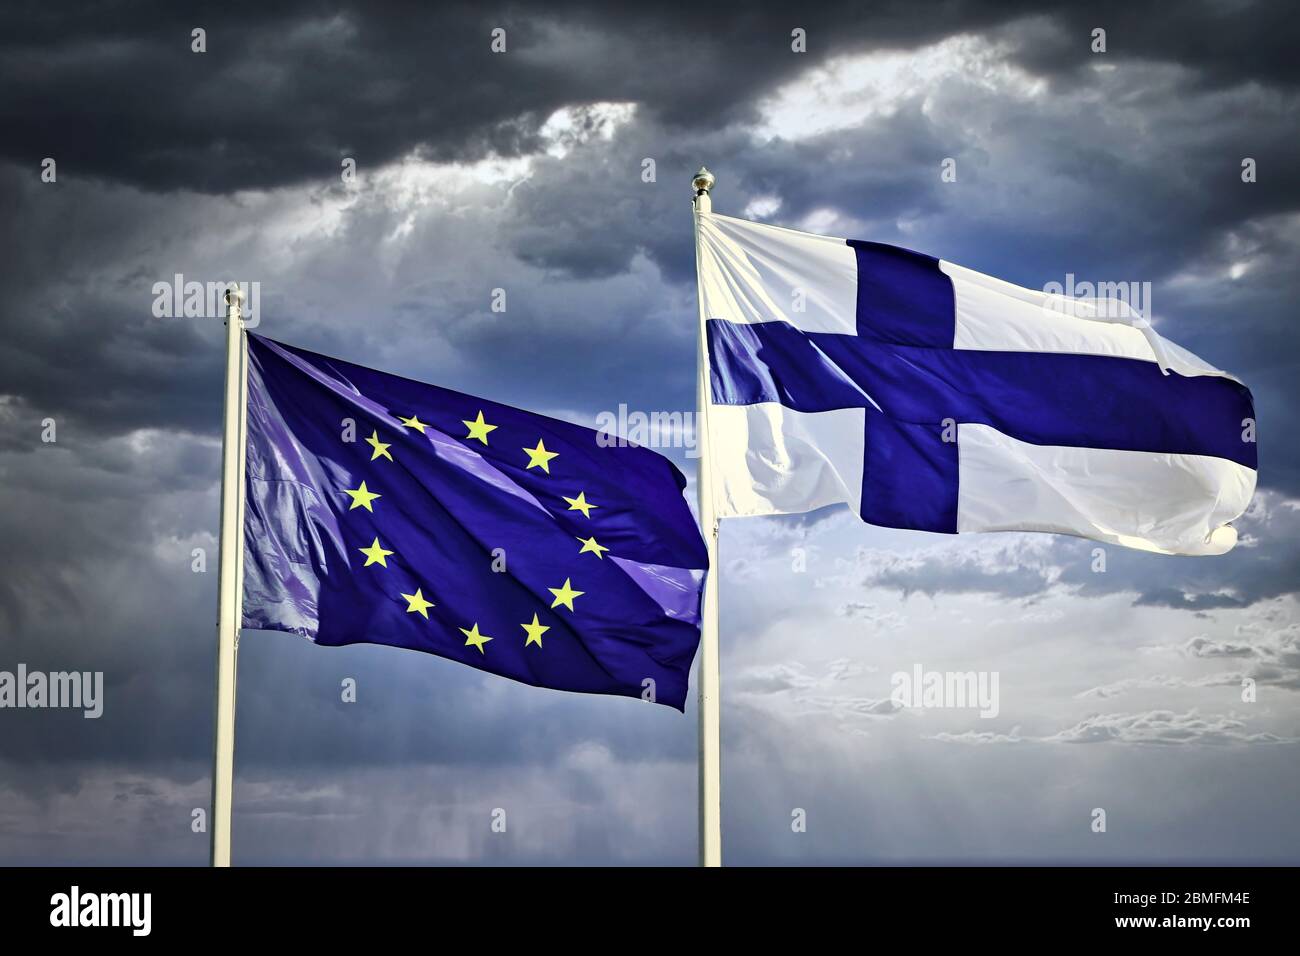 Flags of EU and Finland against dramatic, dark and cloudy sky. Stock Photo